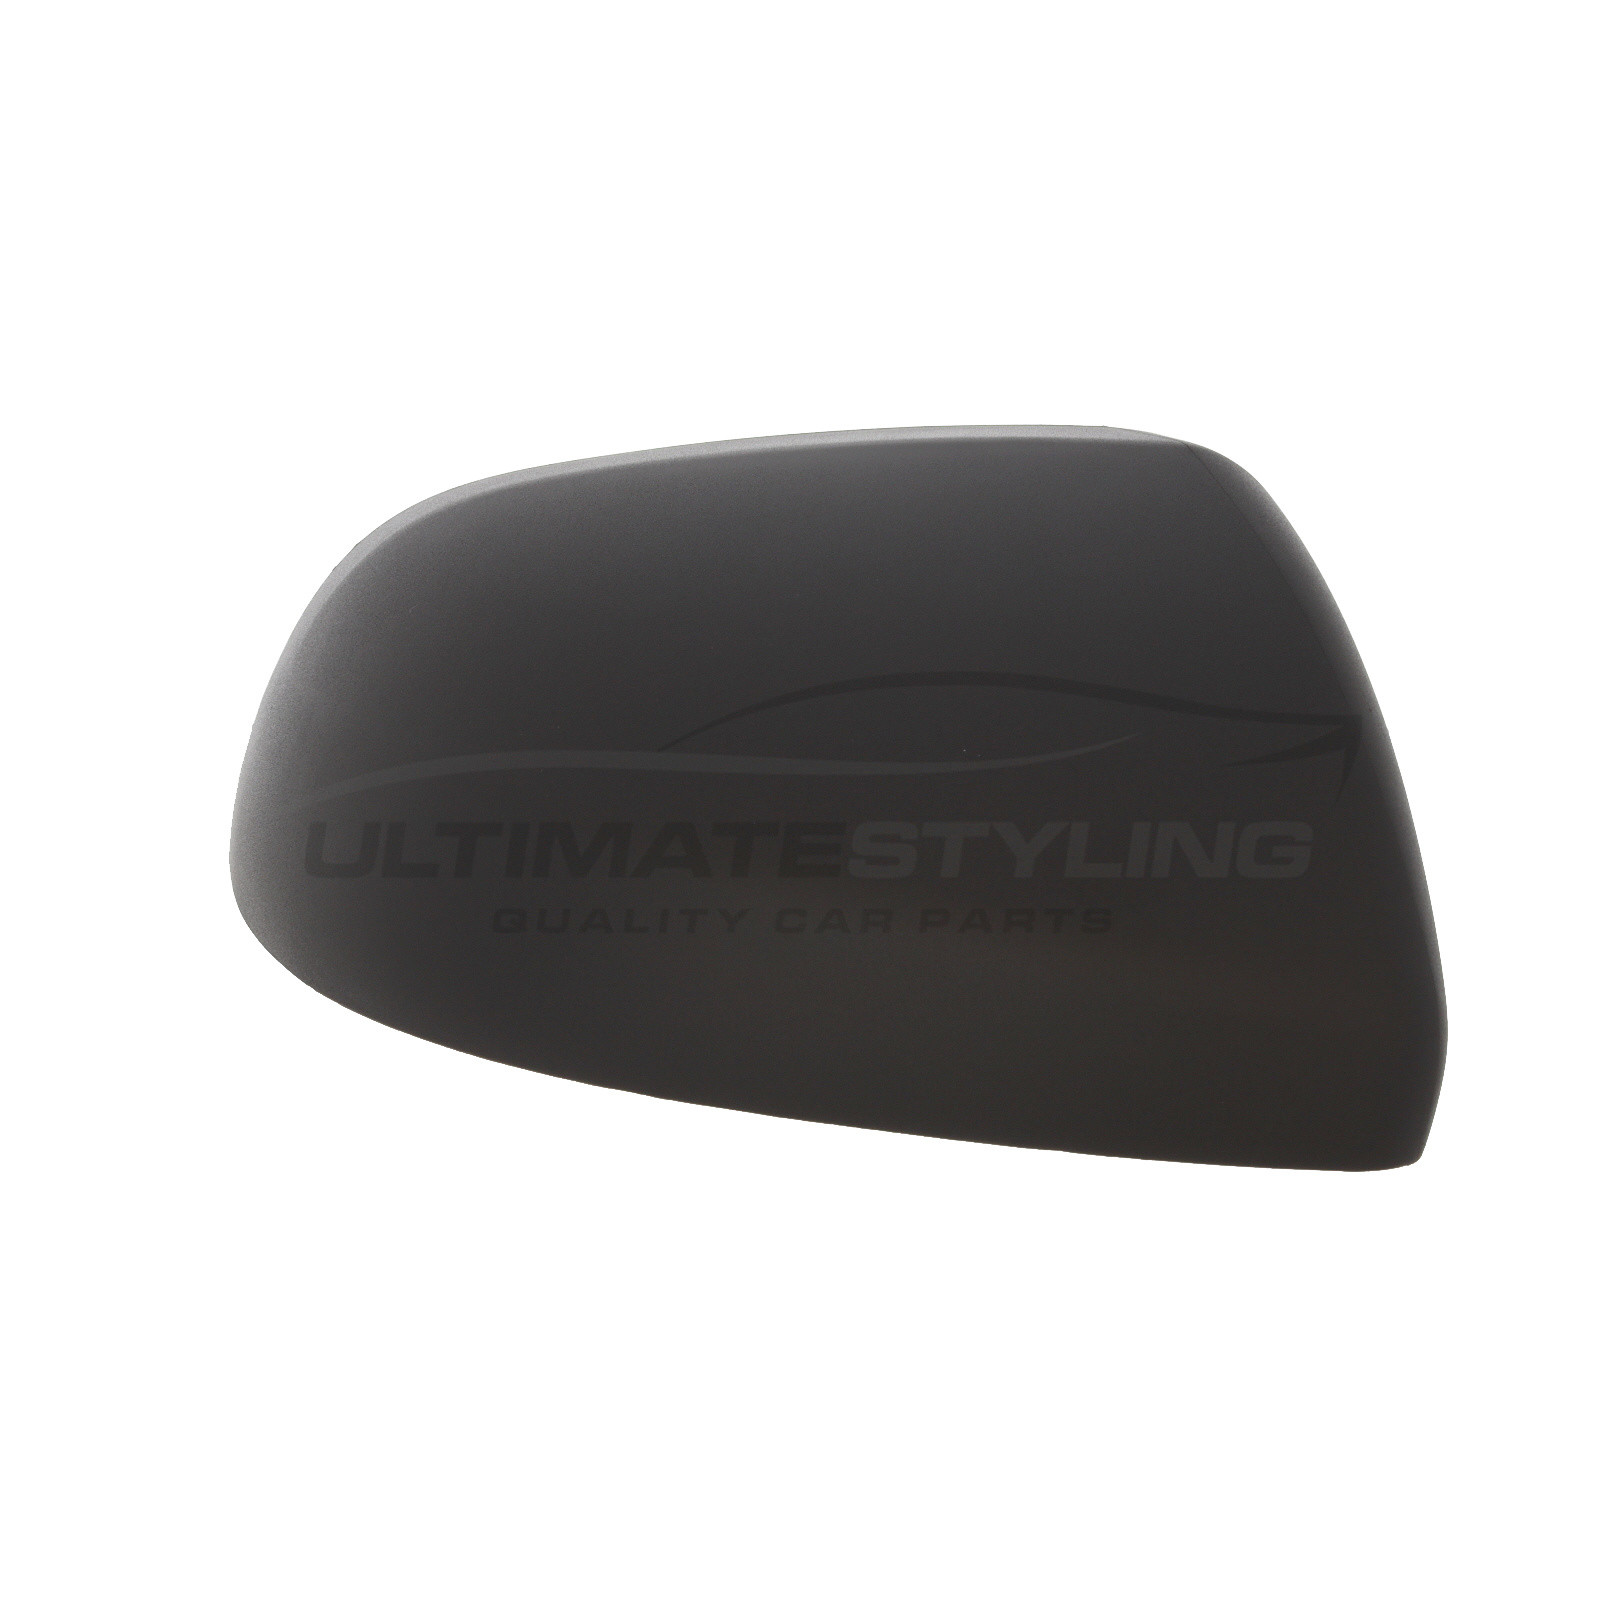 Mercedes Benz Vito 2015-> Wing Mirror Cover Cap Casing Black (Textured)  Drivers Side (RH)